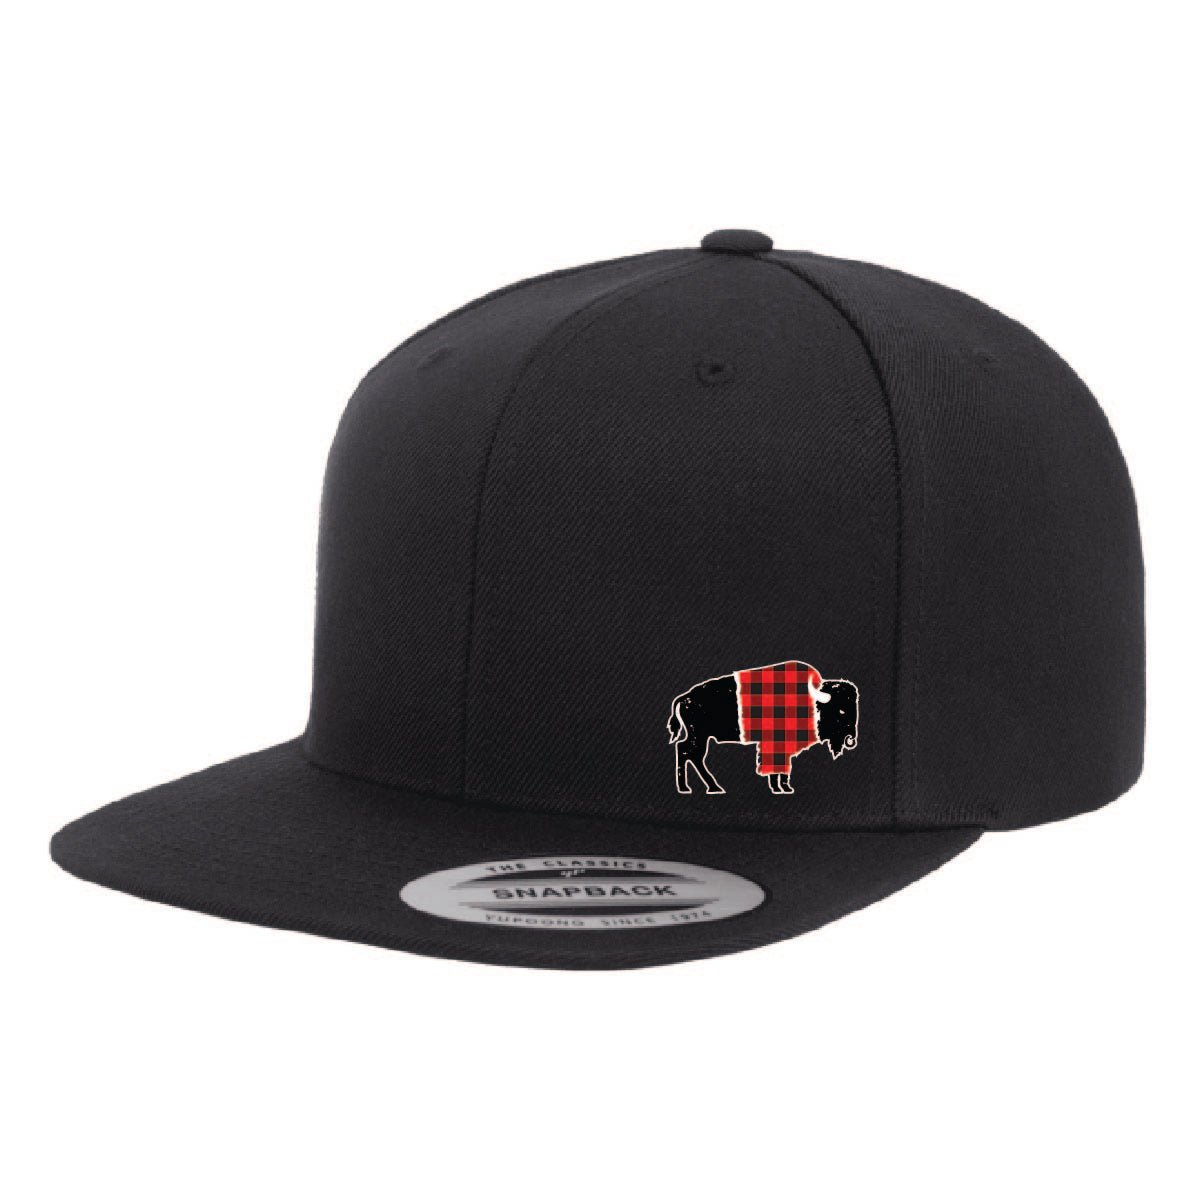 OBC Flat Bill Snapback Hat - SALE ENDS DECEMBER 5th!